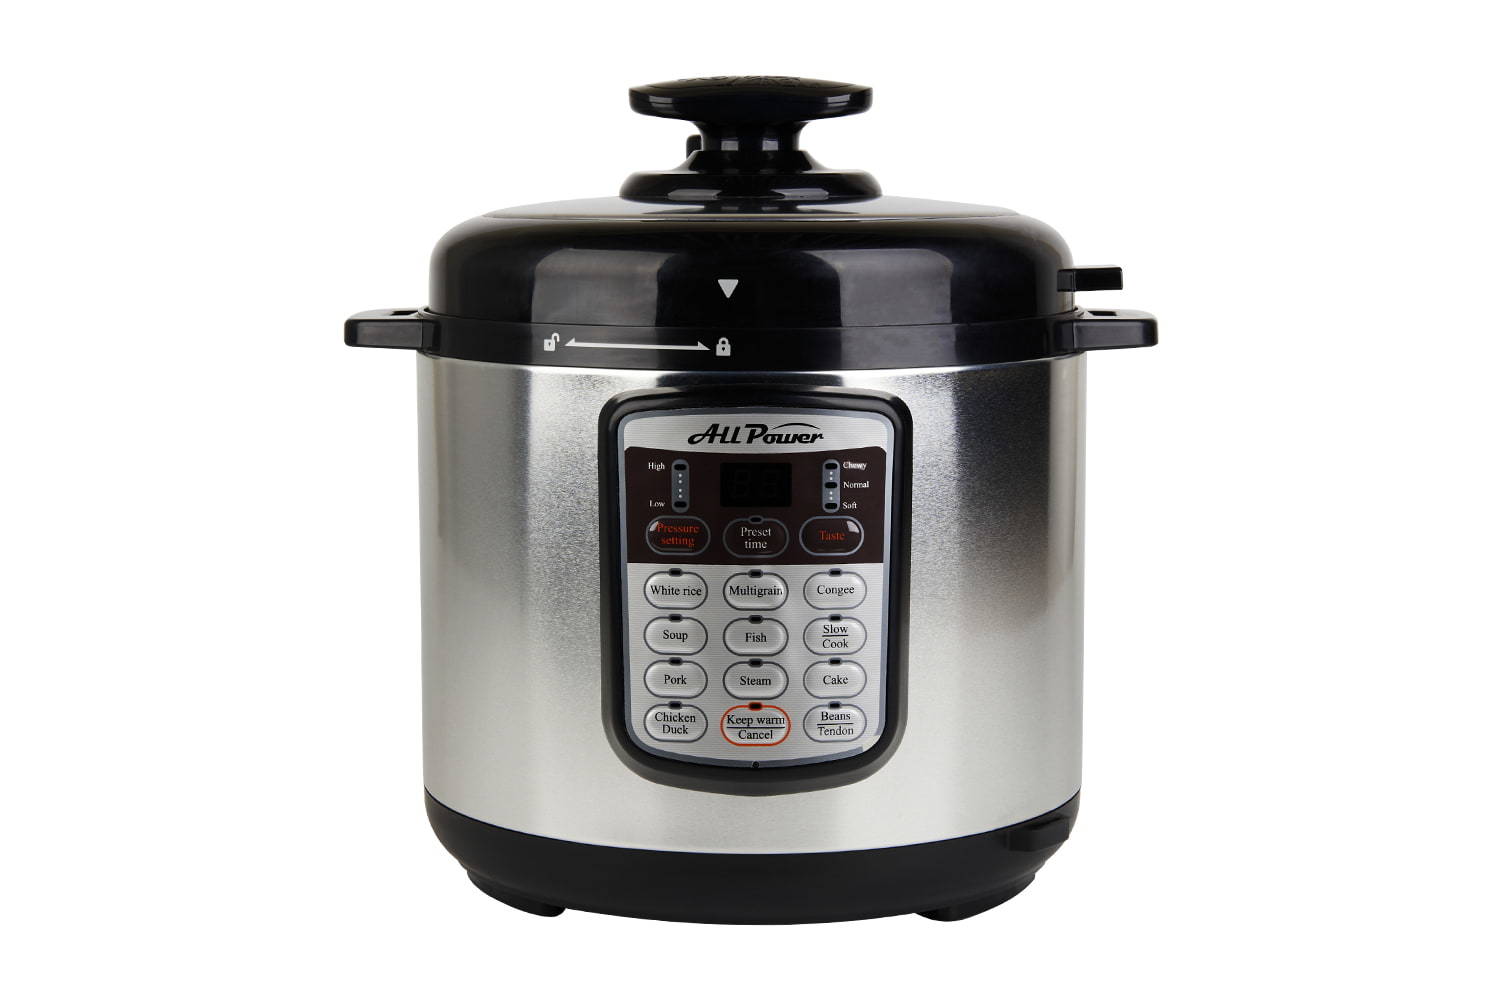 Pressure Cooker Wholesale - What to Look For in a Pressure Cooker